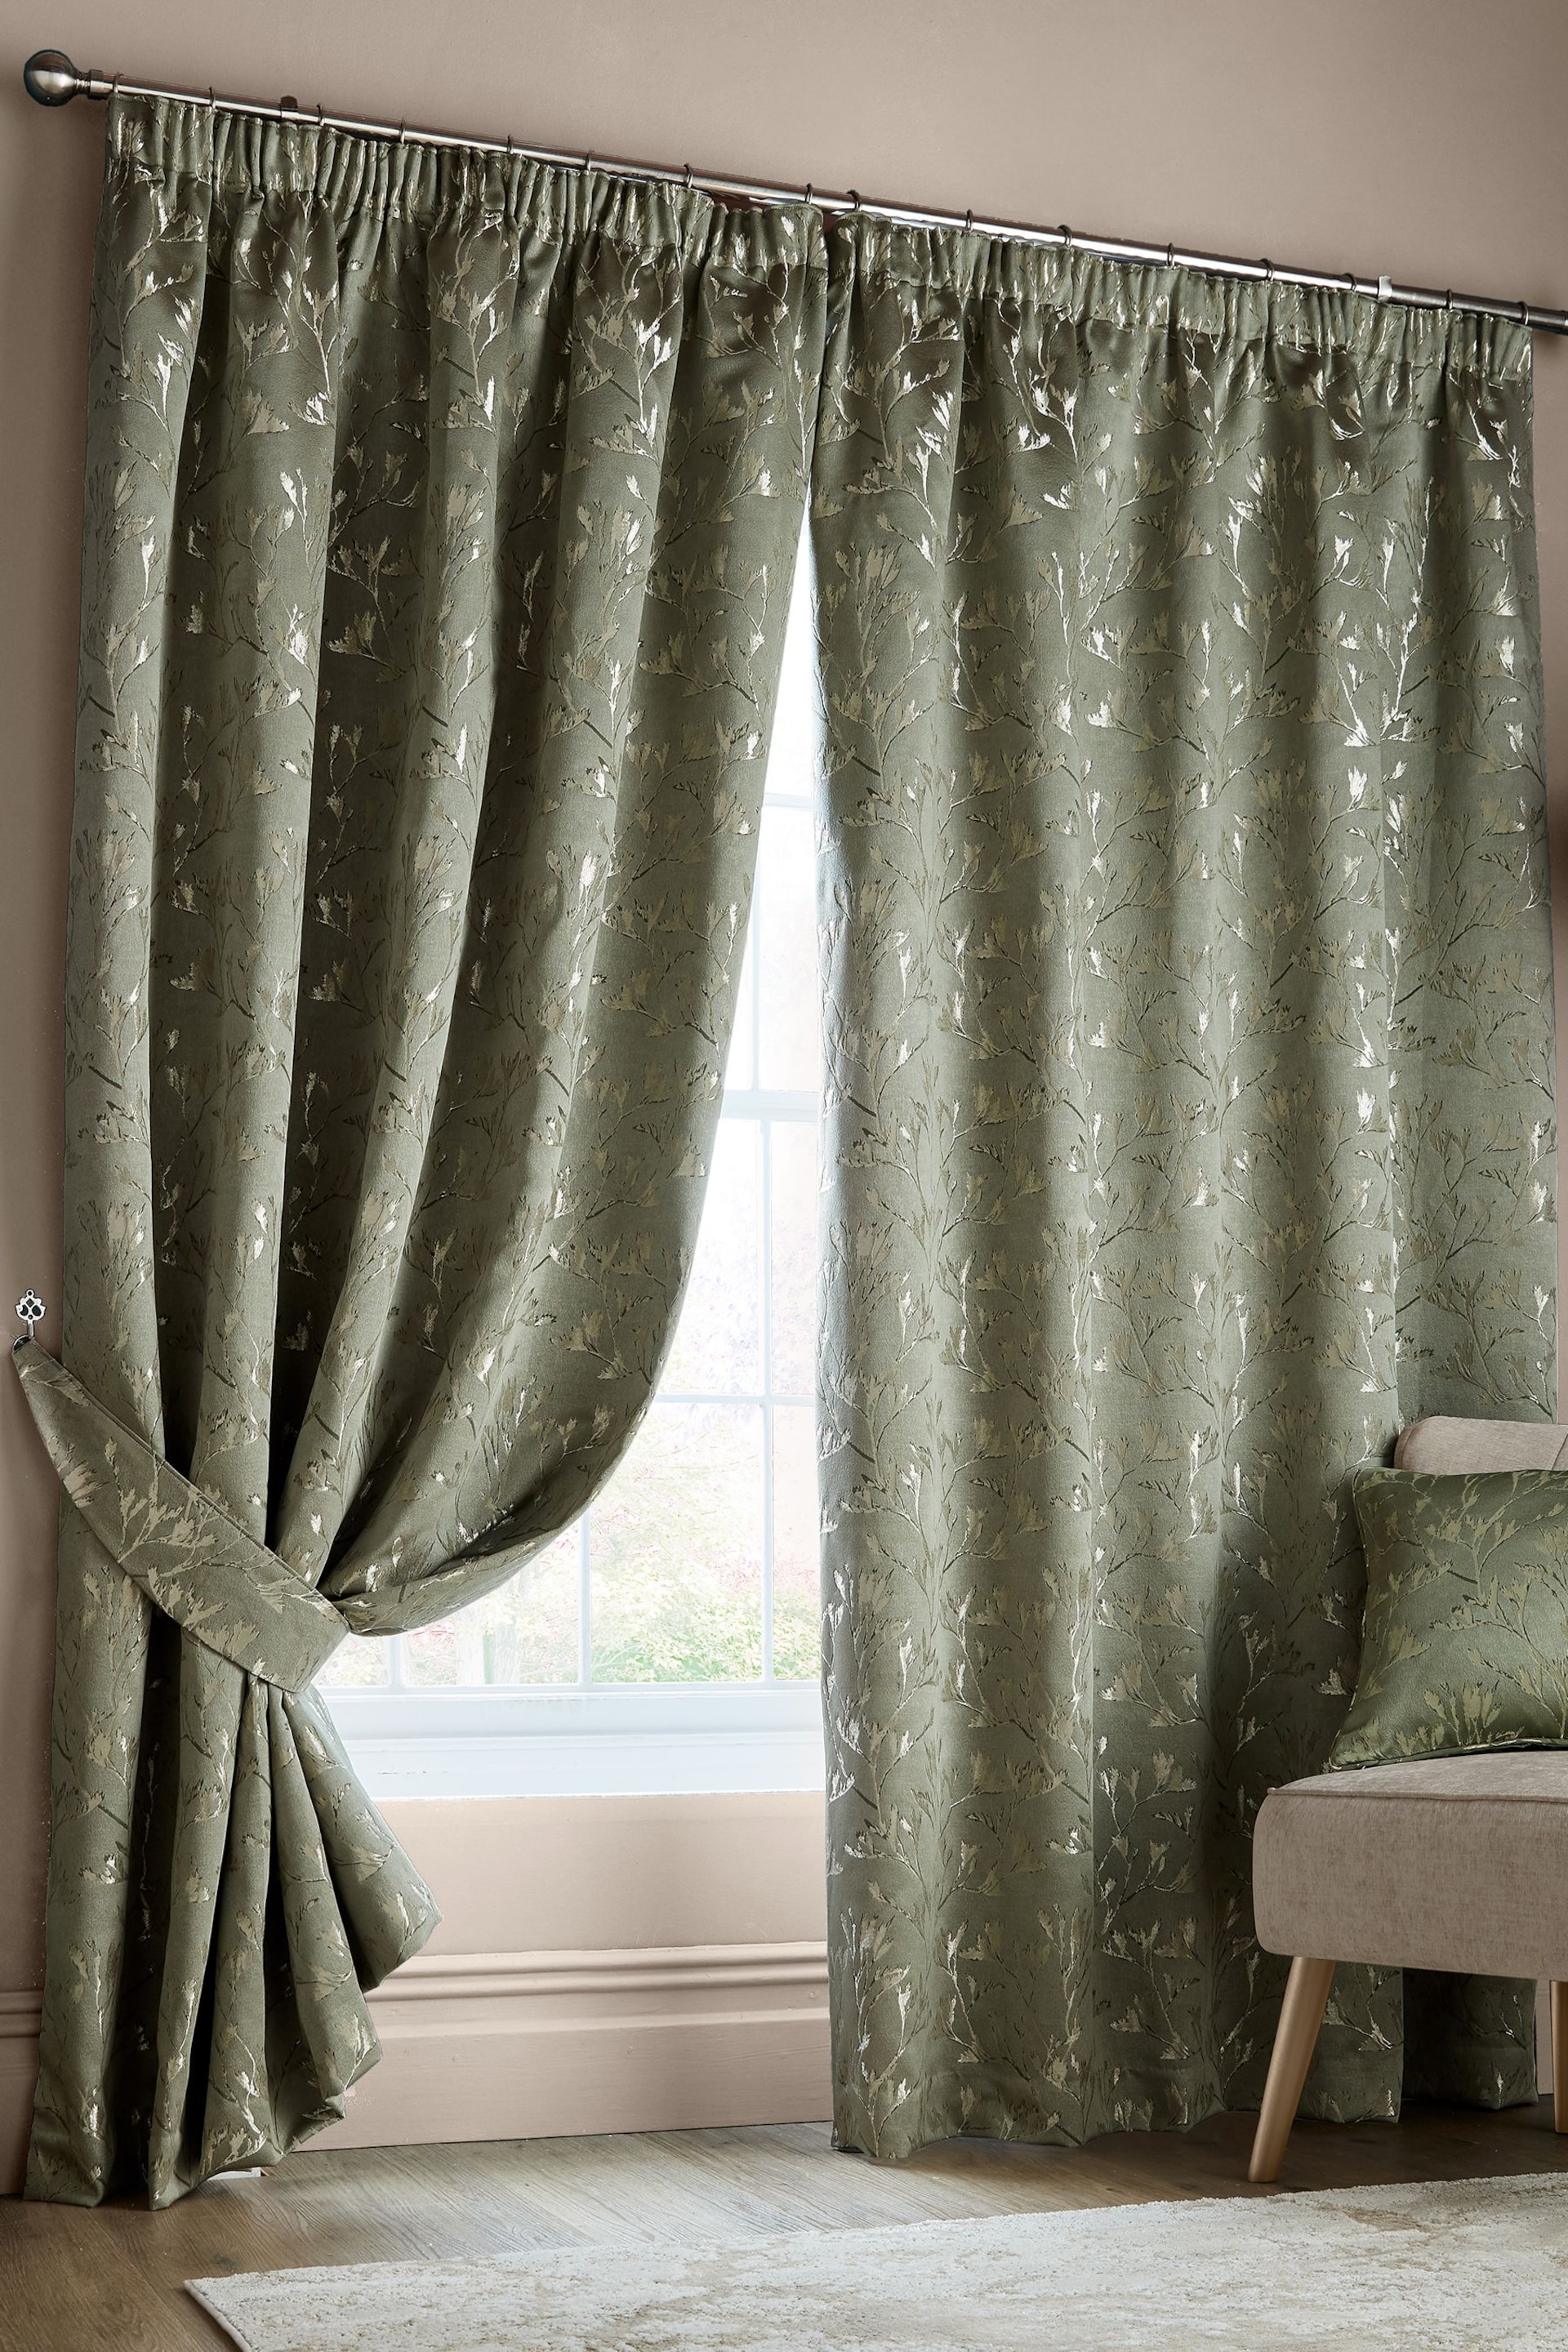 Ashley Wilde Green Hertford Pencil Pleat Curtains - Image 1 of 2